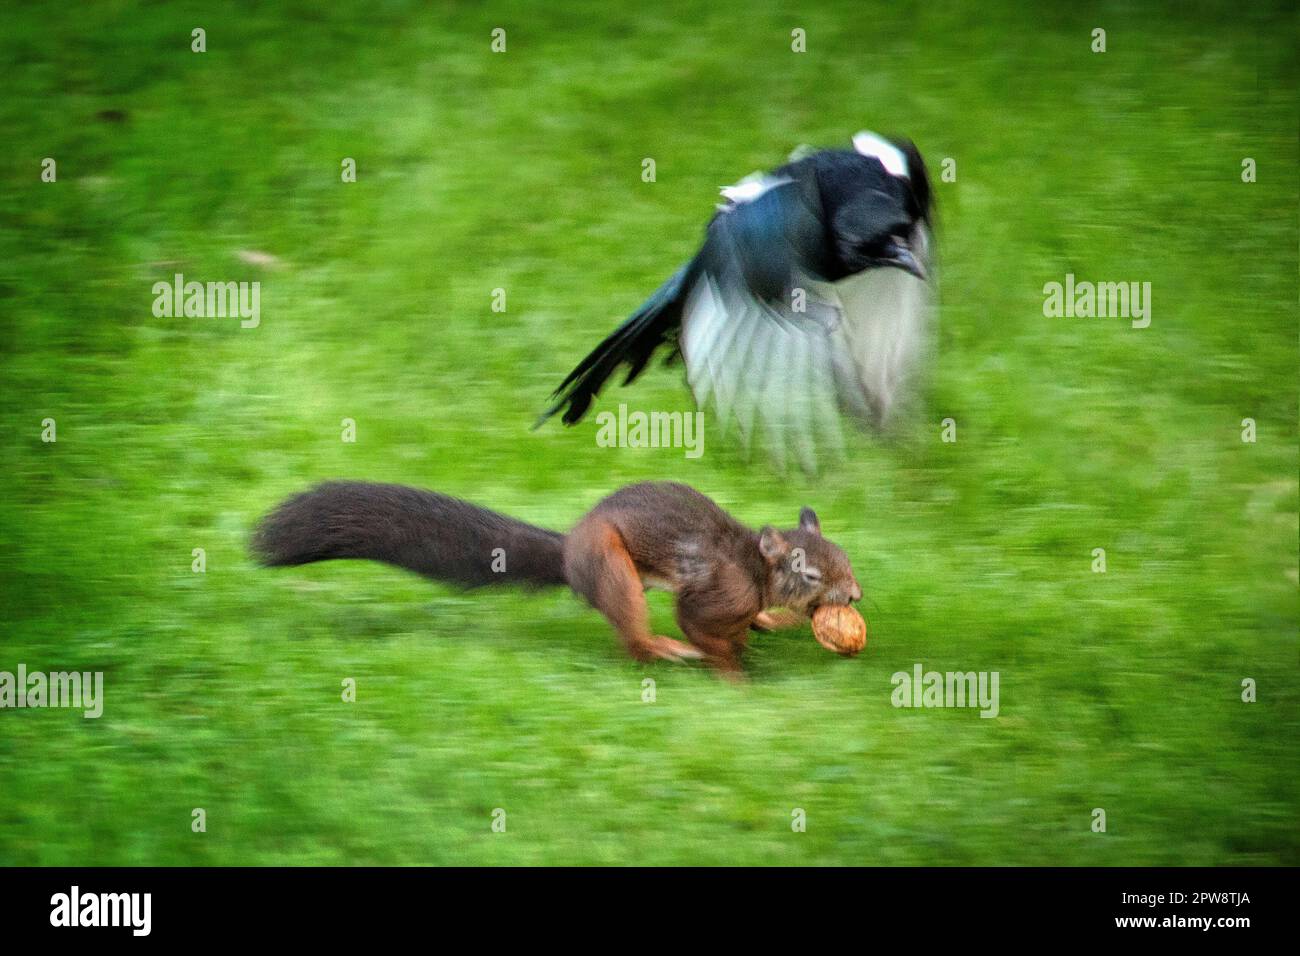 The Netherlands, Õs-Graveland. Red squirrel or Eurasian red squirrel (Sciurus vulgaris) with walnut. A magpie chaseds the squirrel, hoping it will rel Stock Photo